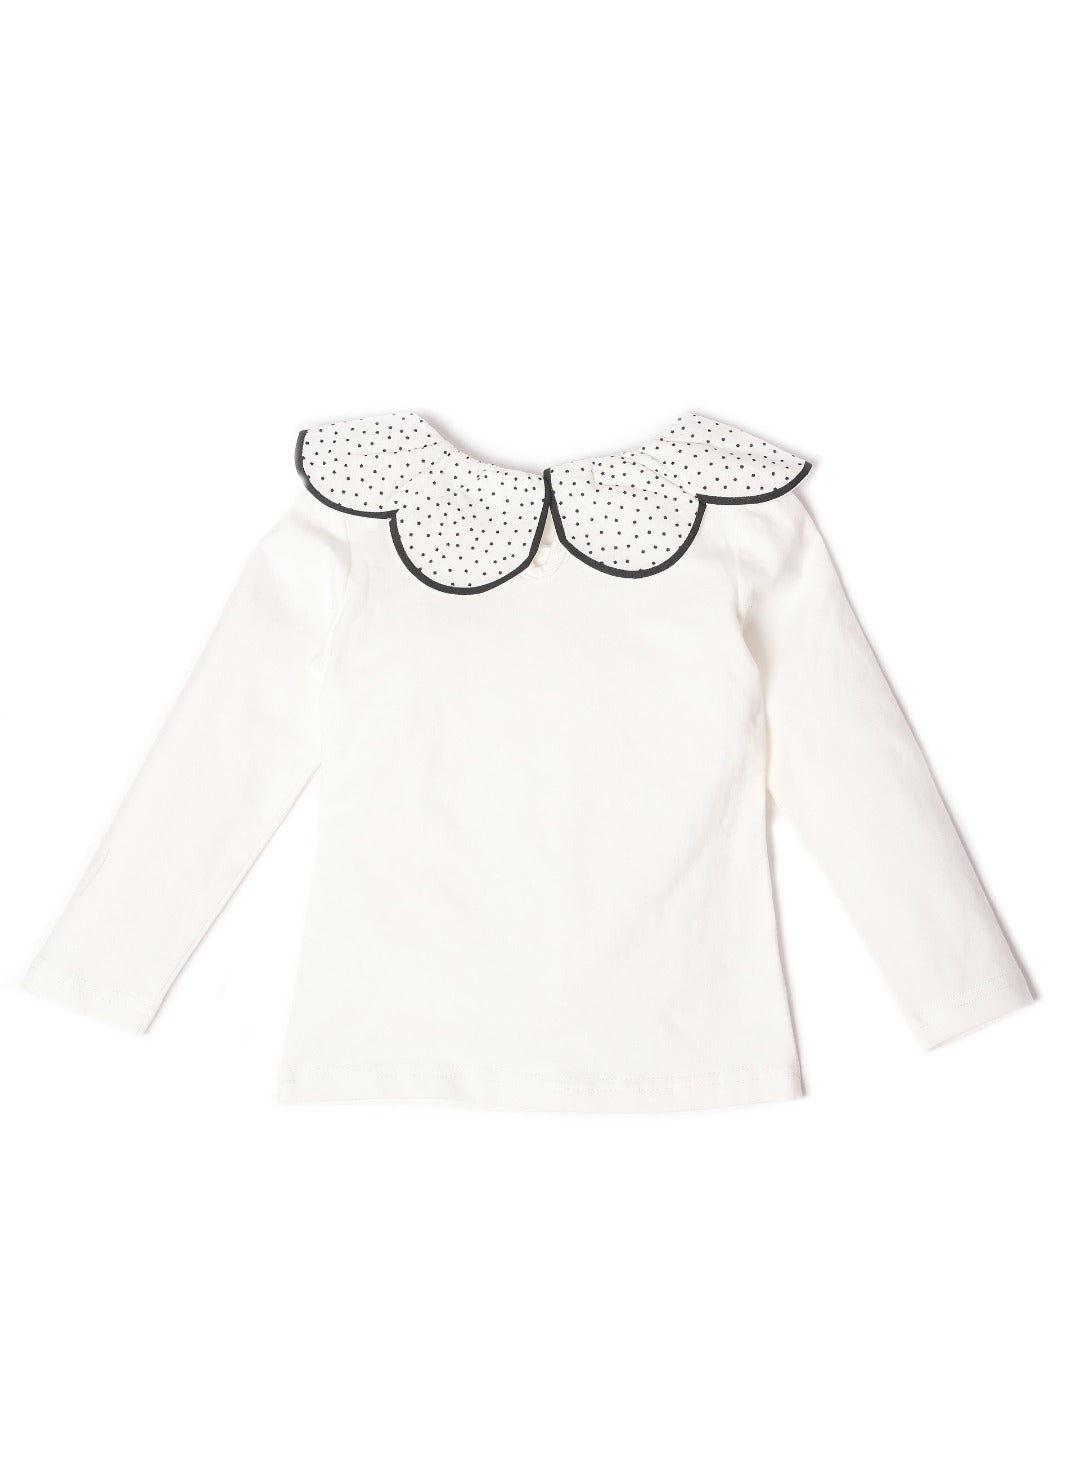 pearl white long sleeves top with black neck line